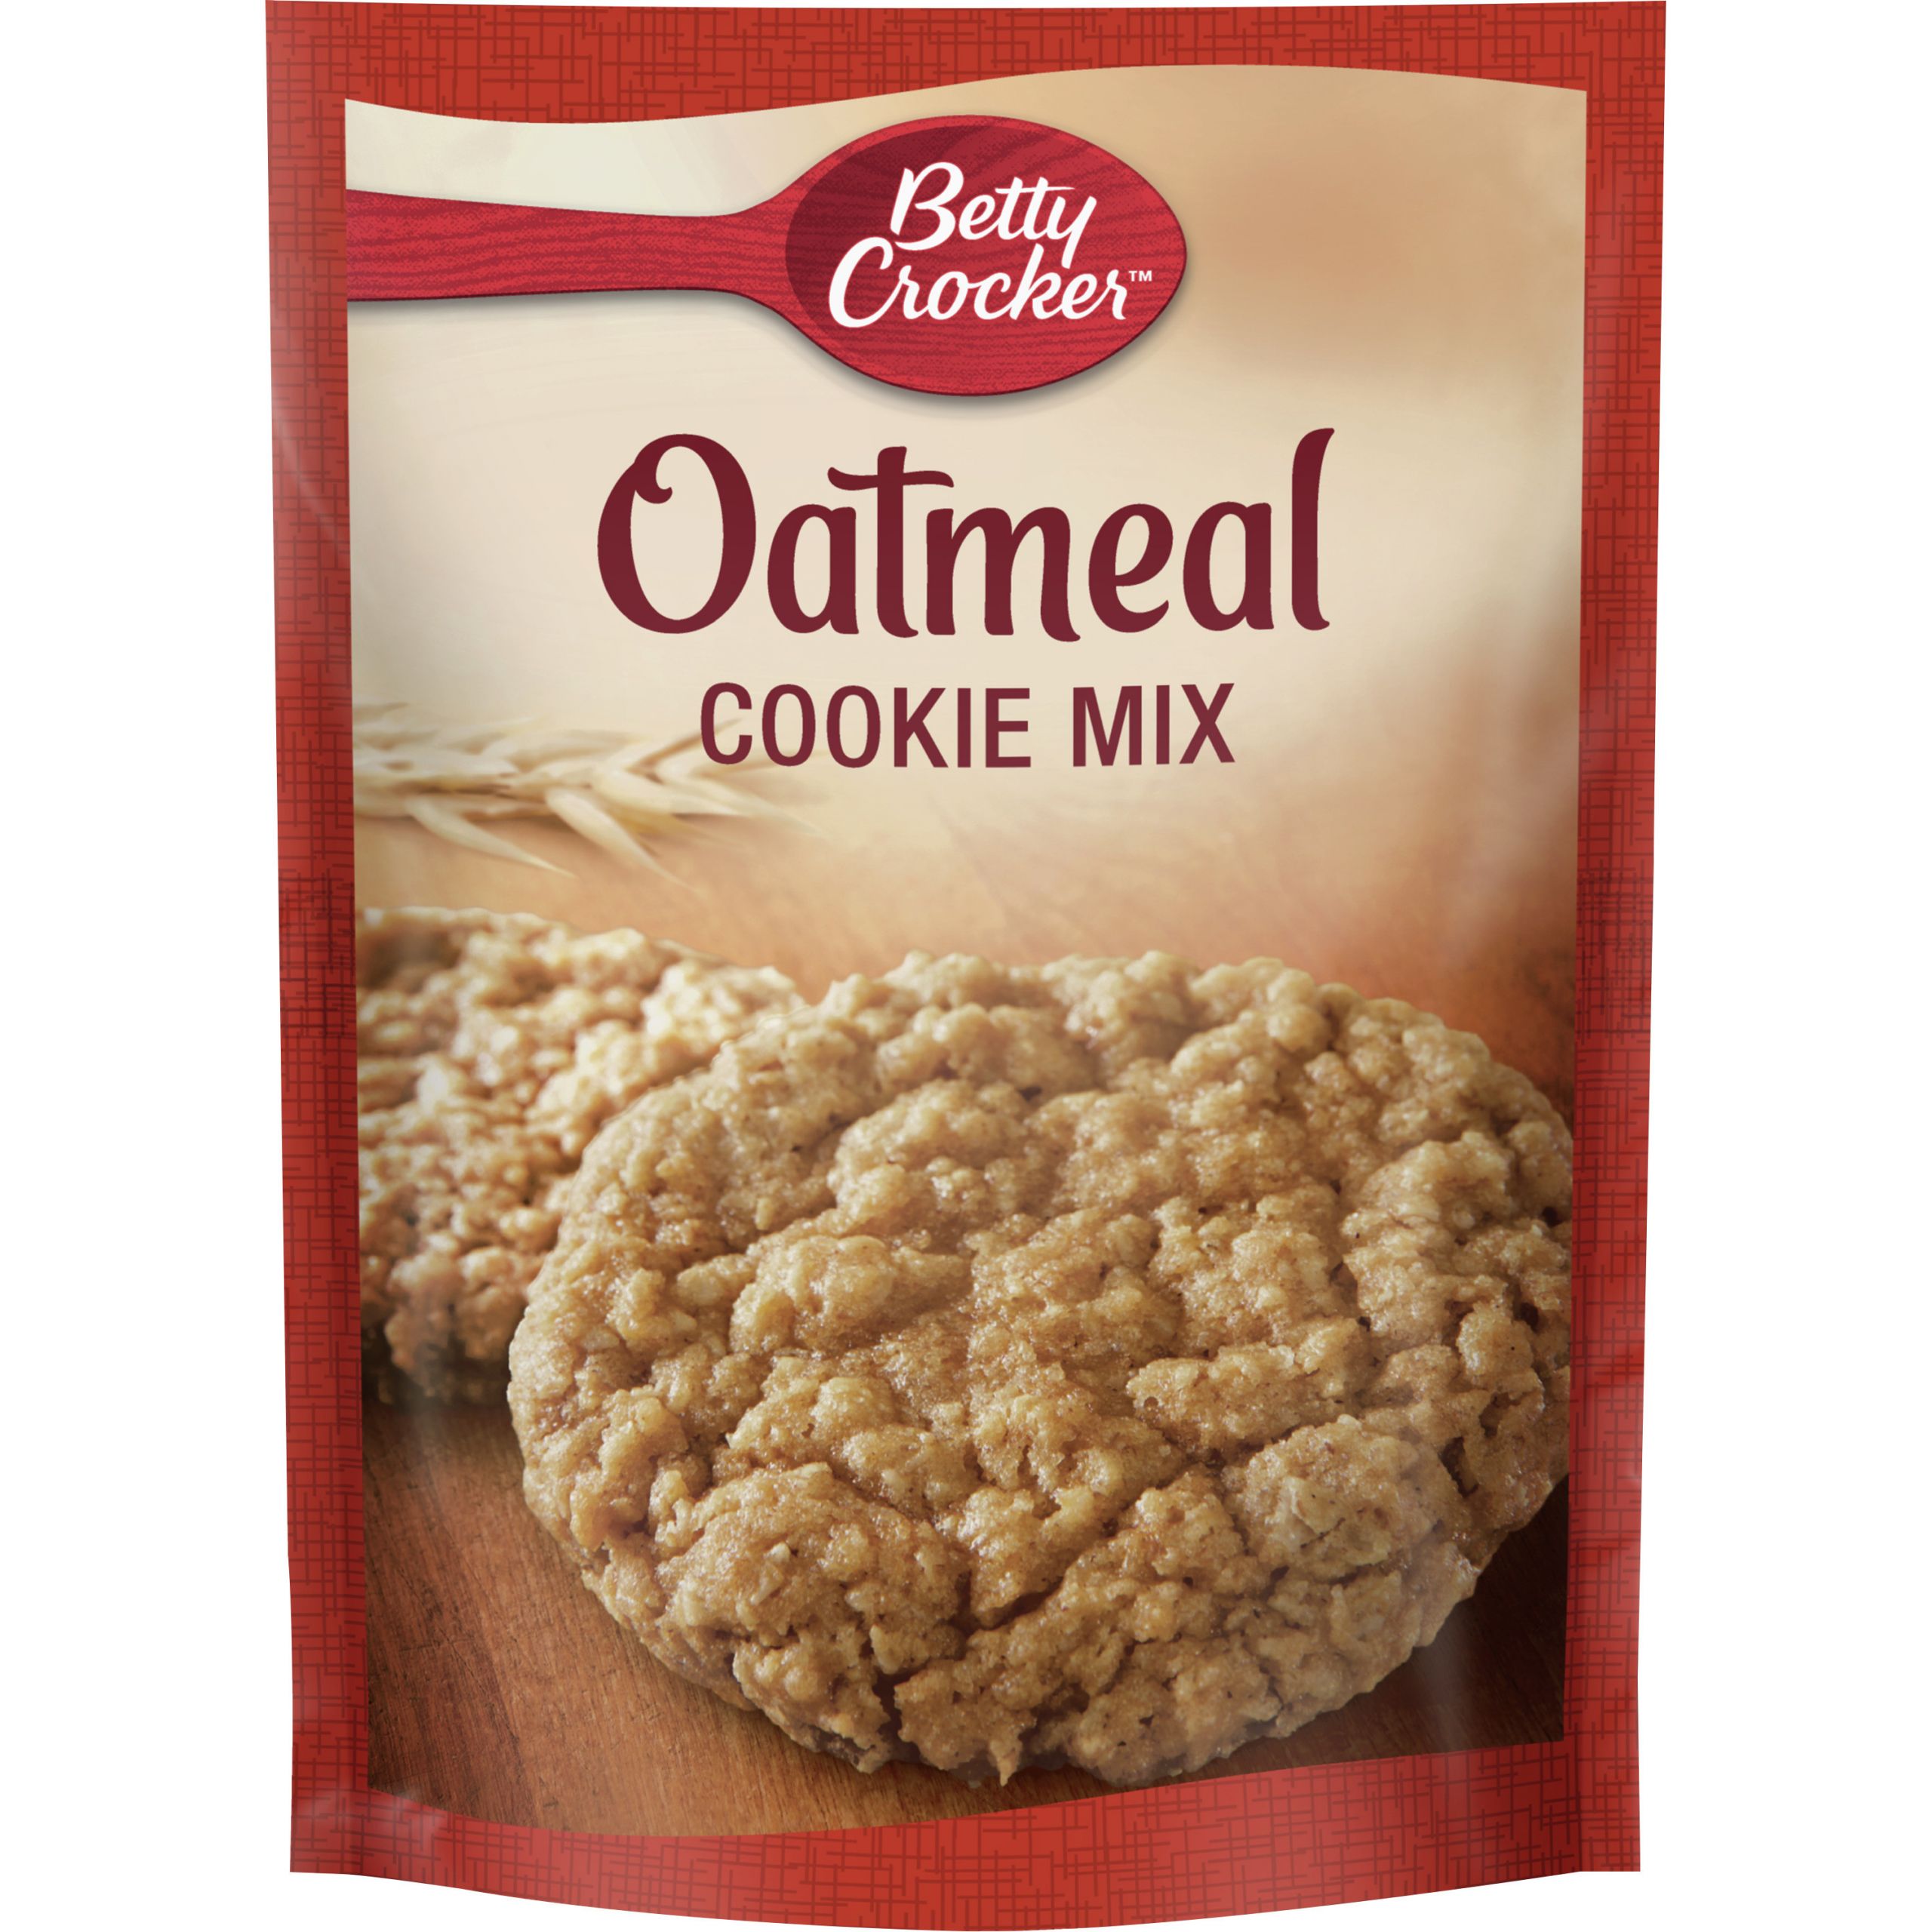 The 15 Best Ideas for Oatmeal Cookies Mix